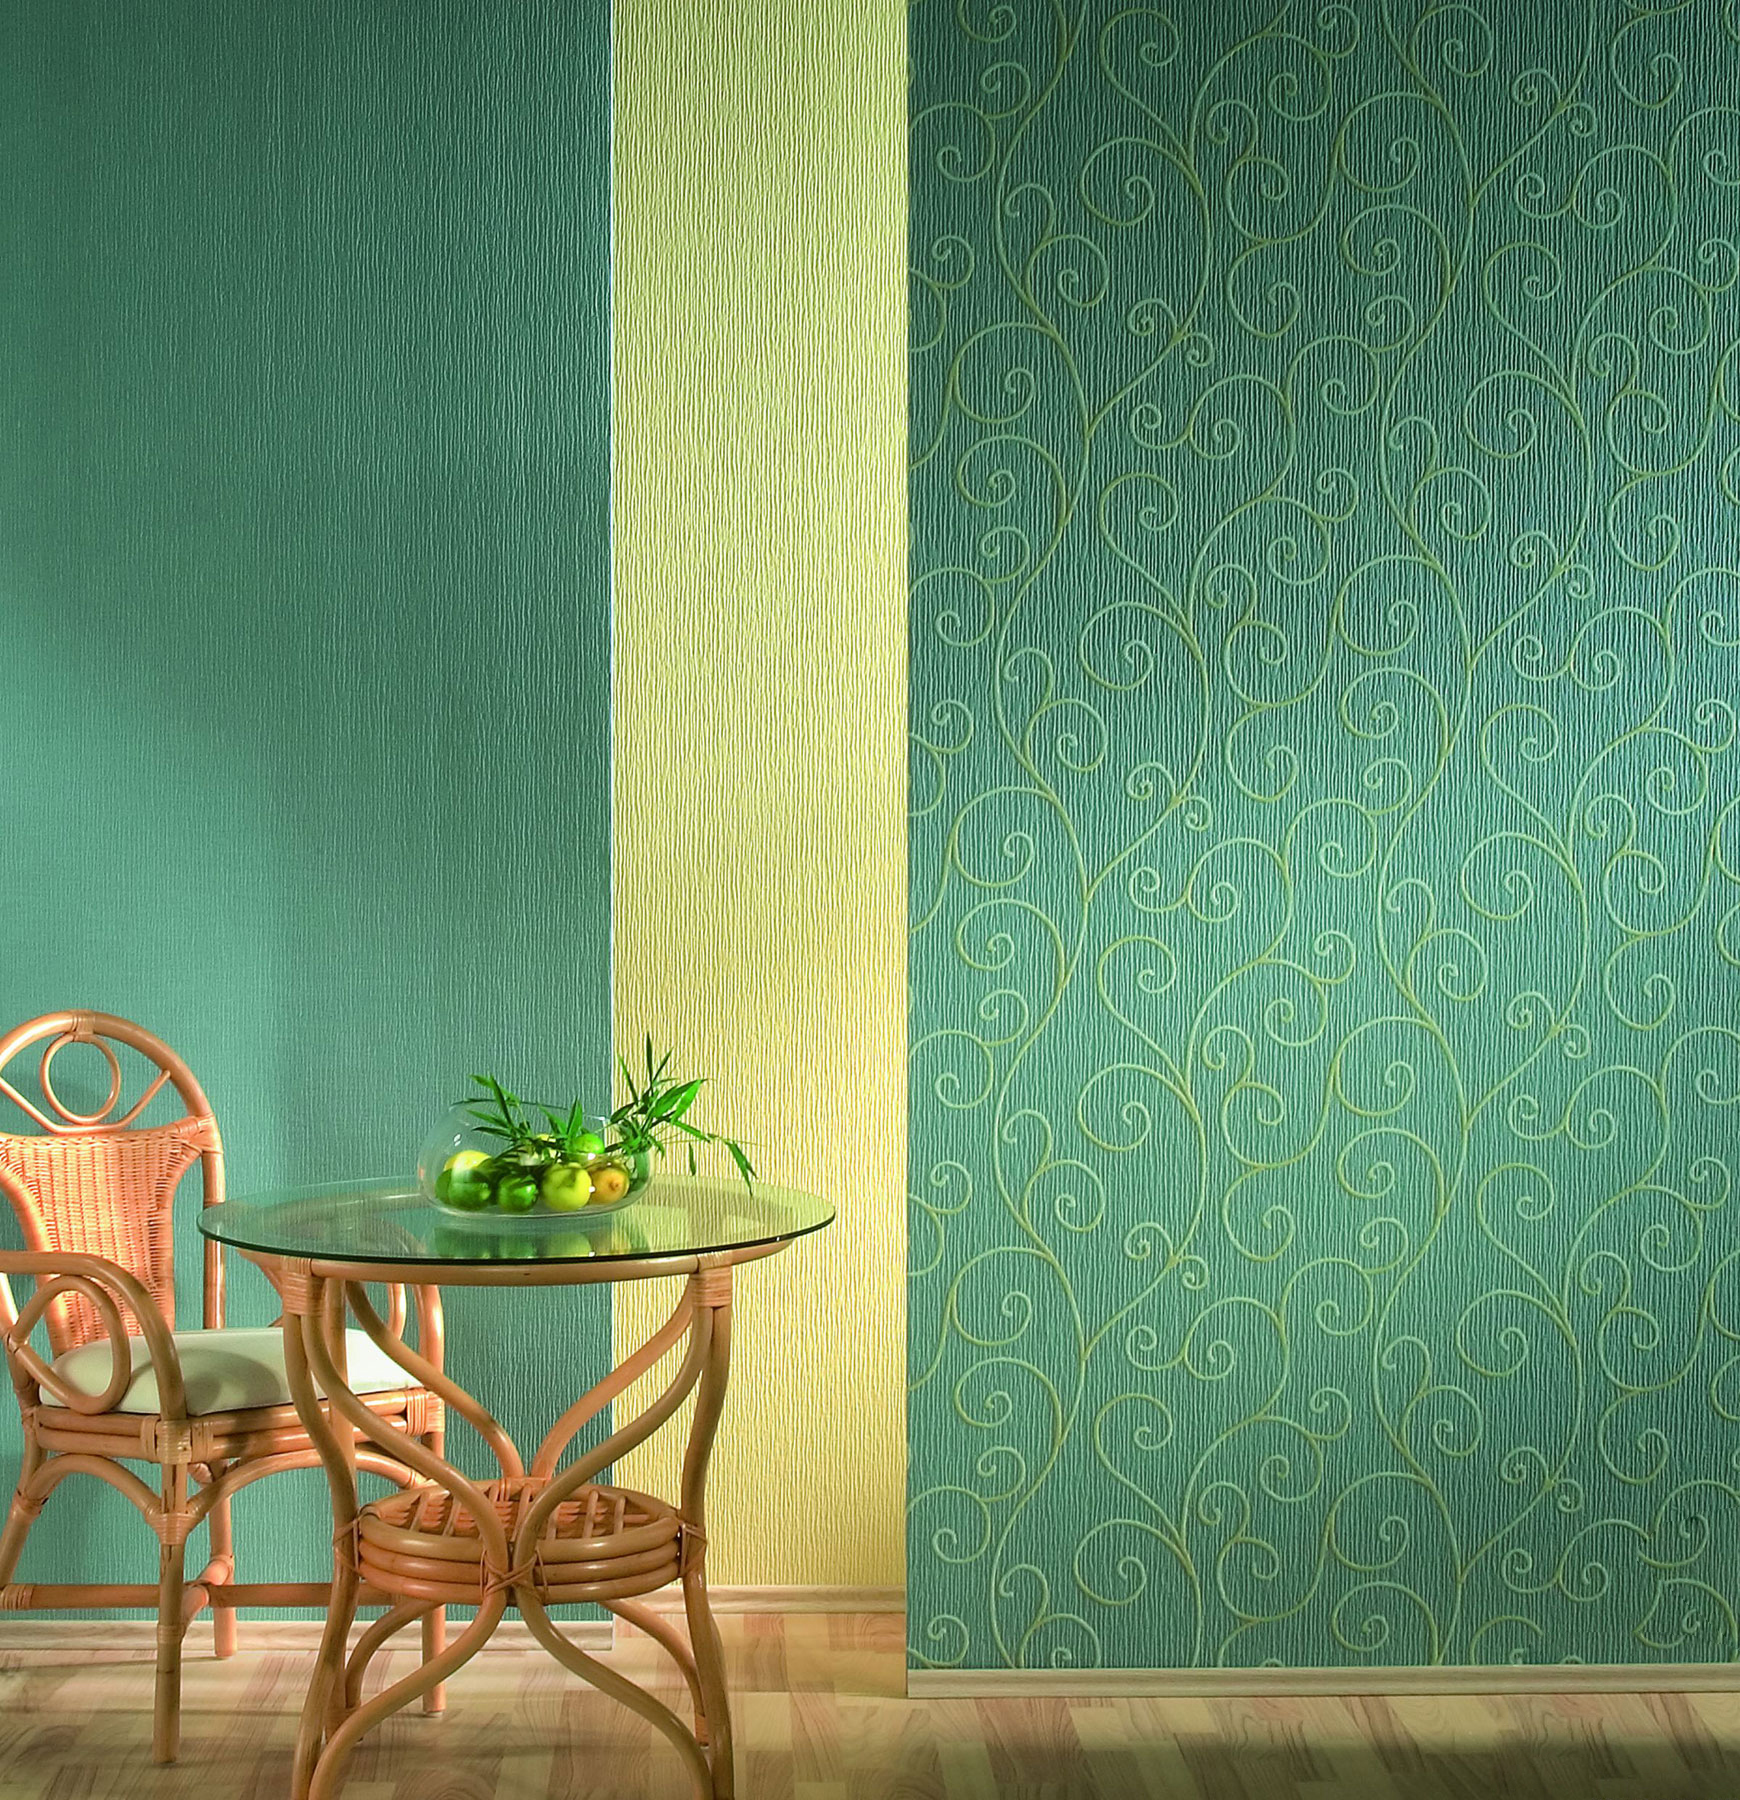  and distributor of fine wallpapers, murals, WallPops peel & stick wall 